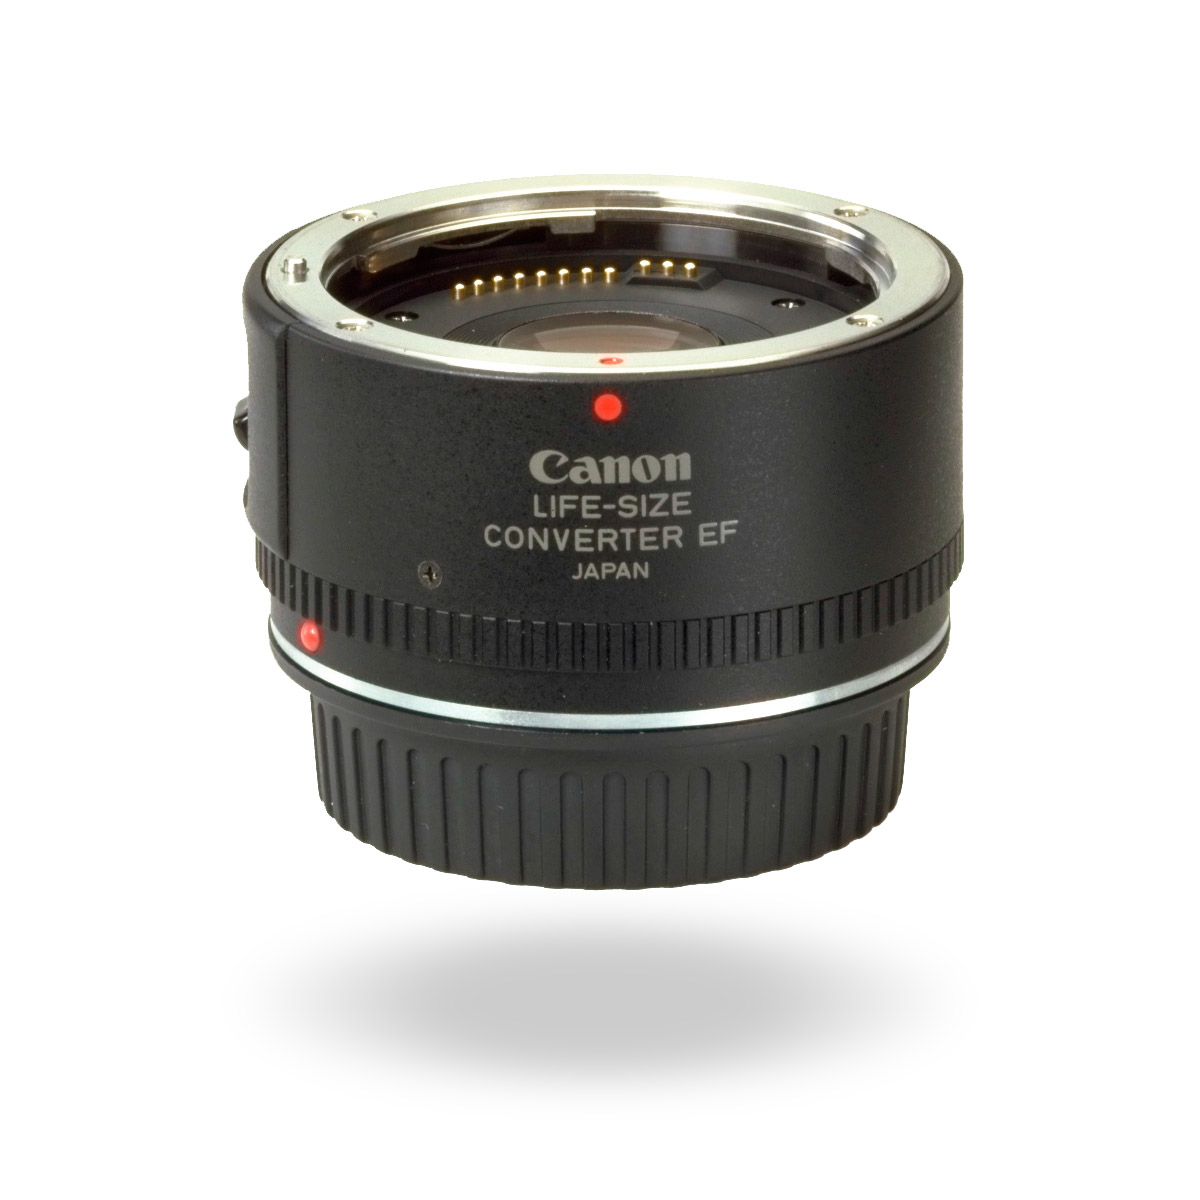 Canon Life-Size Converter EF front